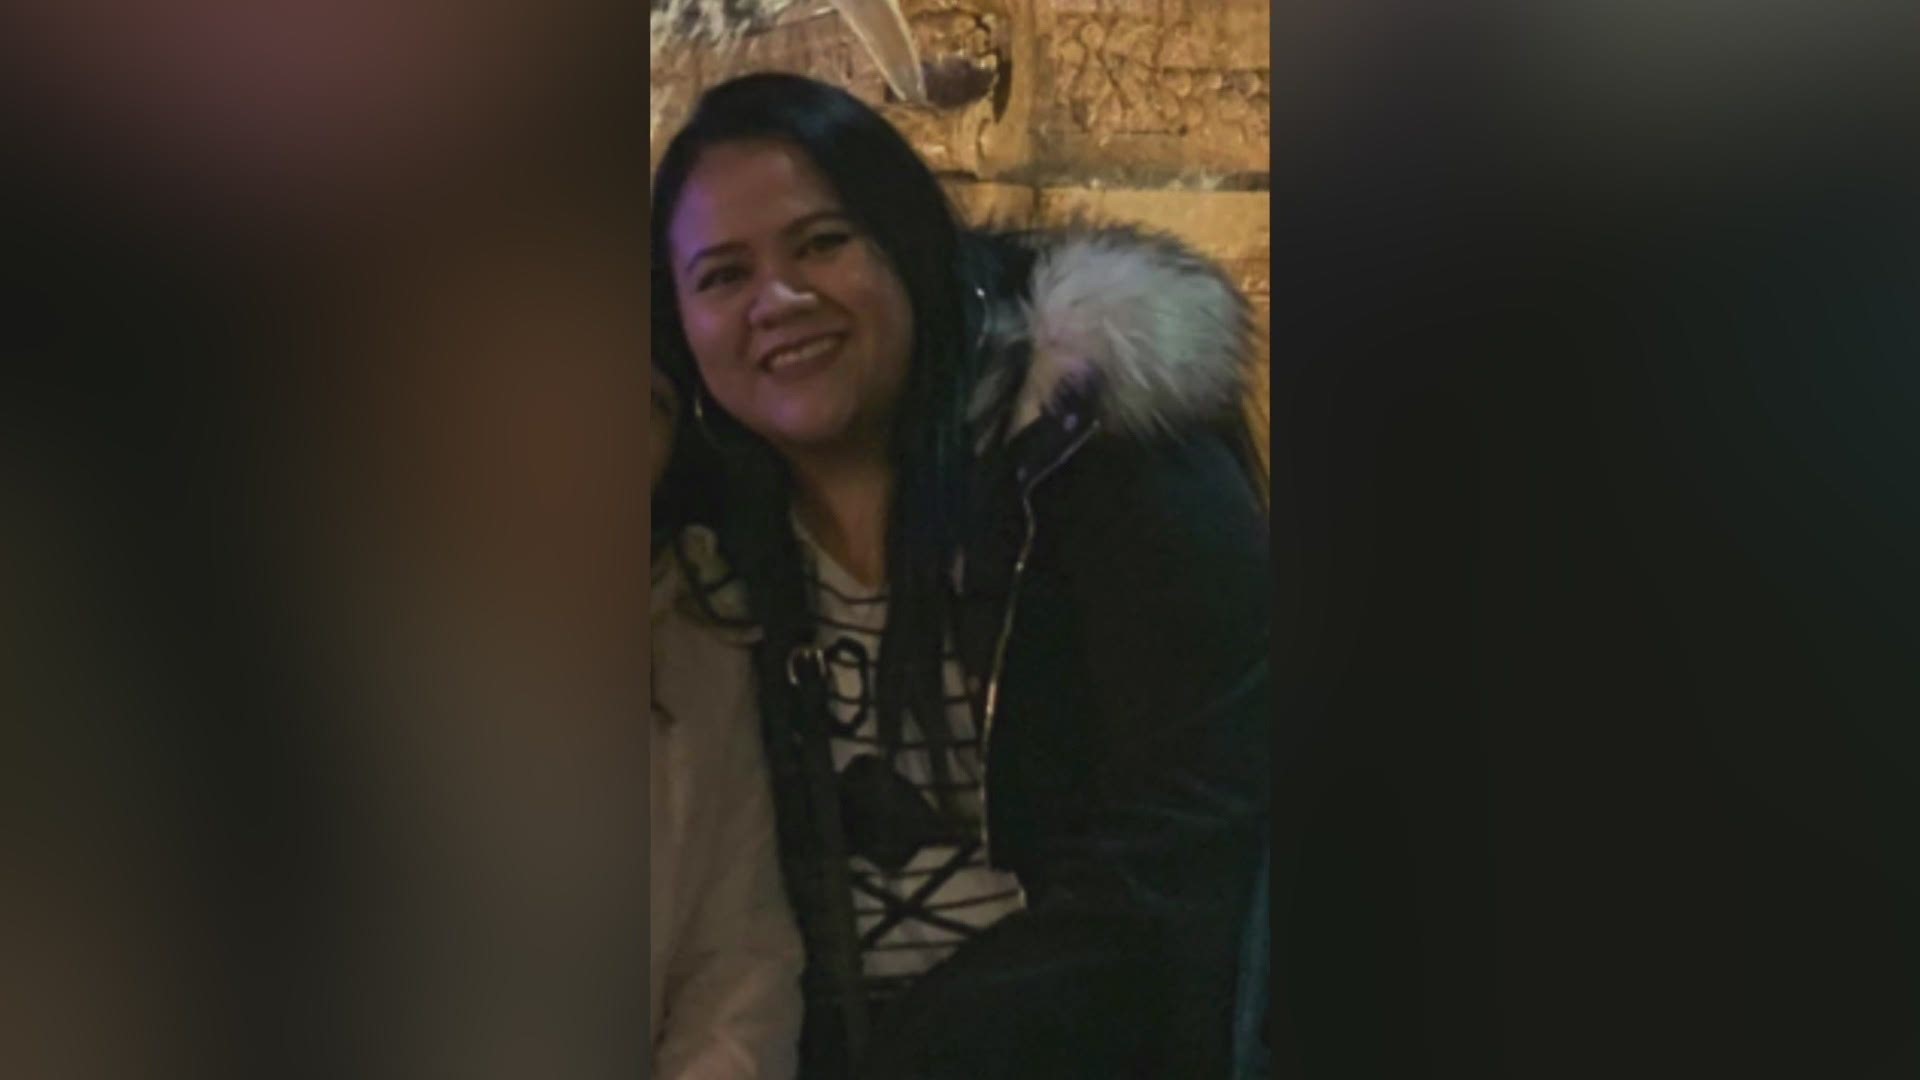 27-year-old Lizzbeth Aleman Popoco has not been seen or heard from since July 1. She is a 5’2” Hispanic female with black hair and dark brown eyes.